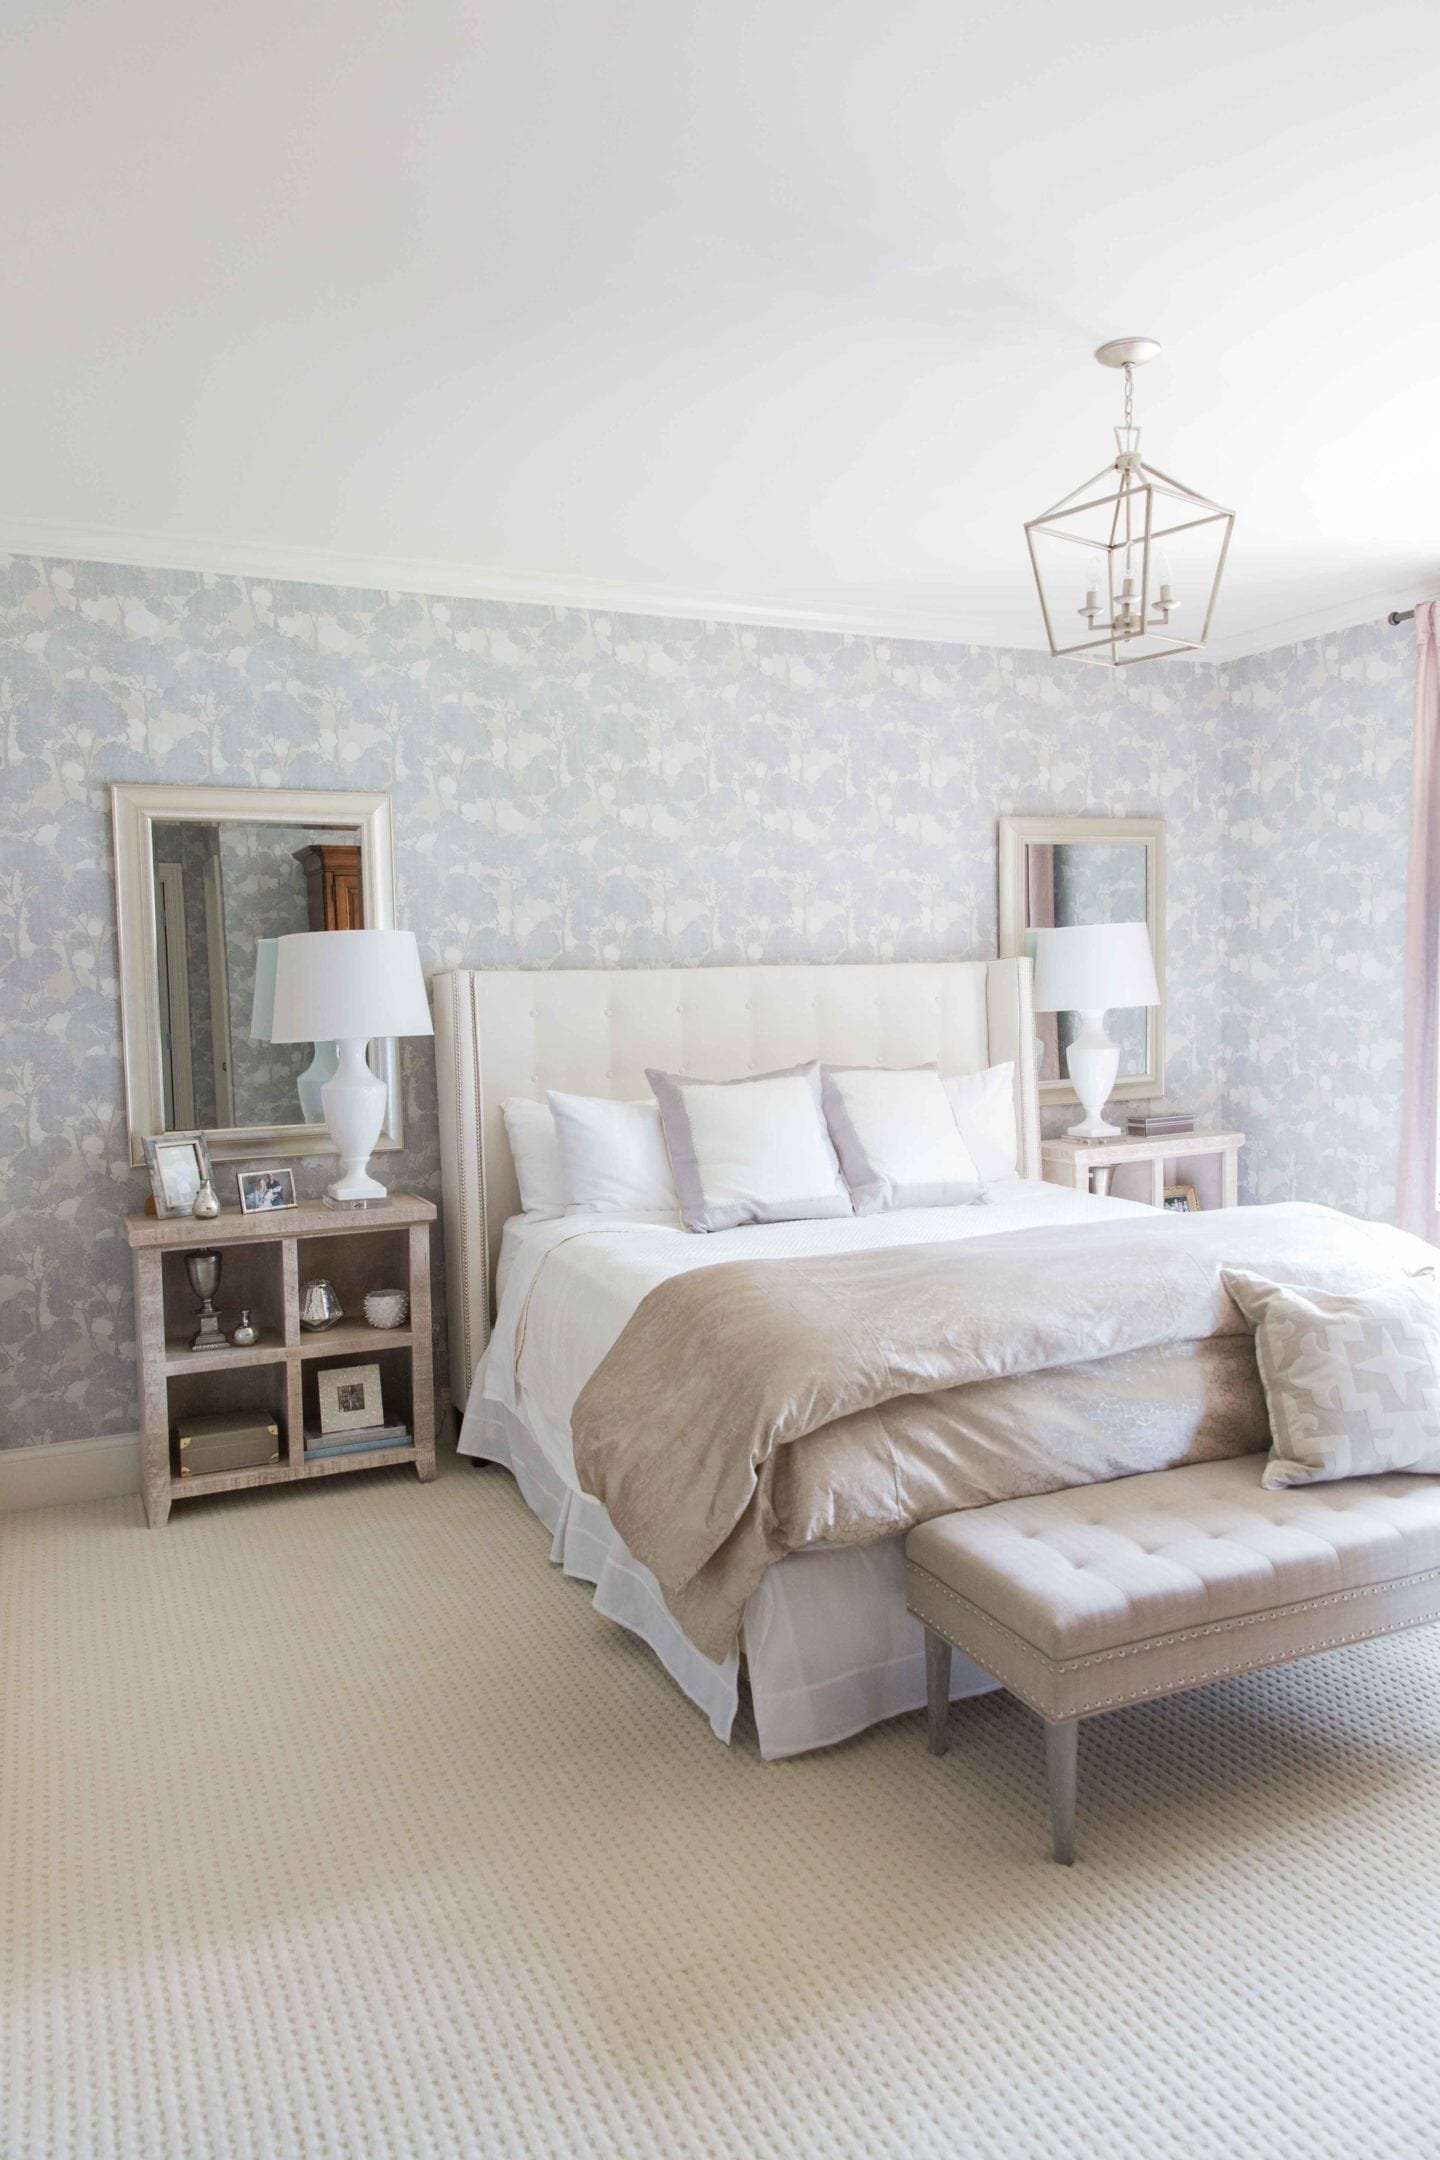 Lavender bedroom makeover from lifestyle blogger, bluegraygal. Using wallpaper in bedroom.